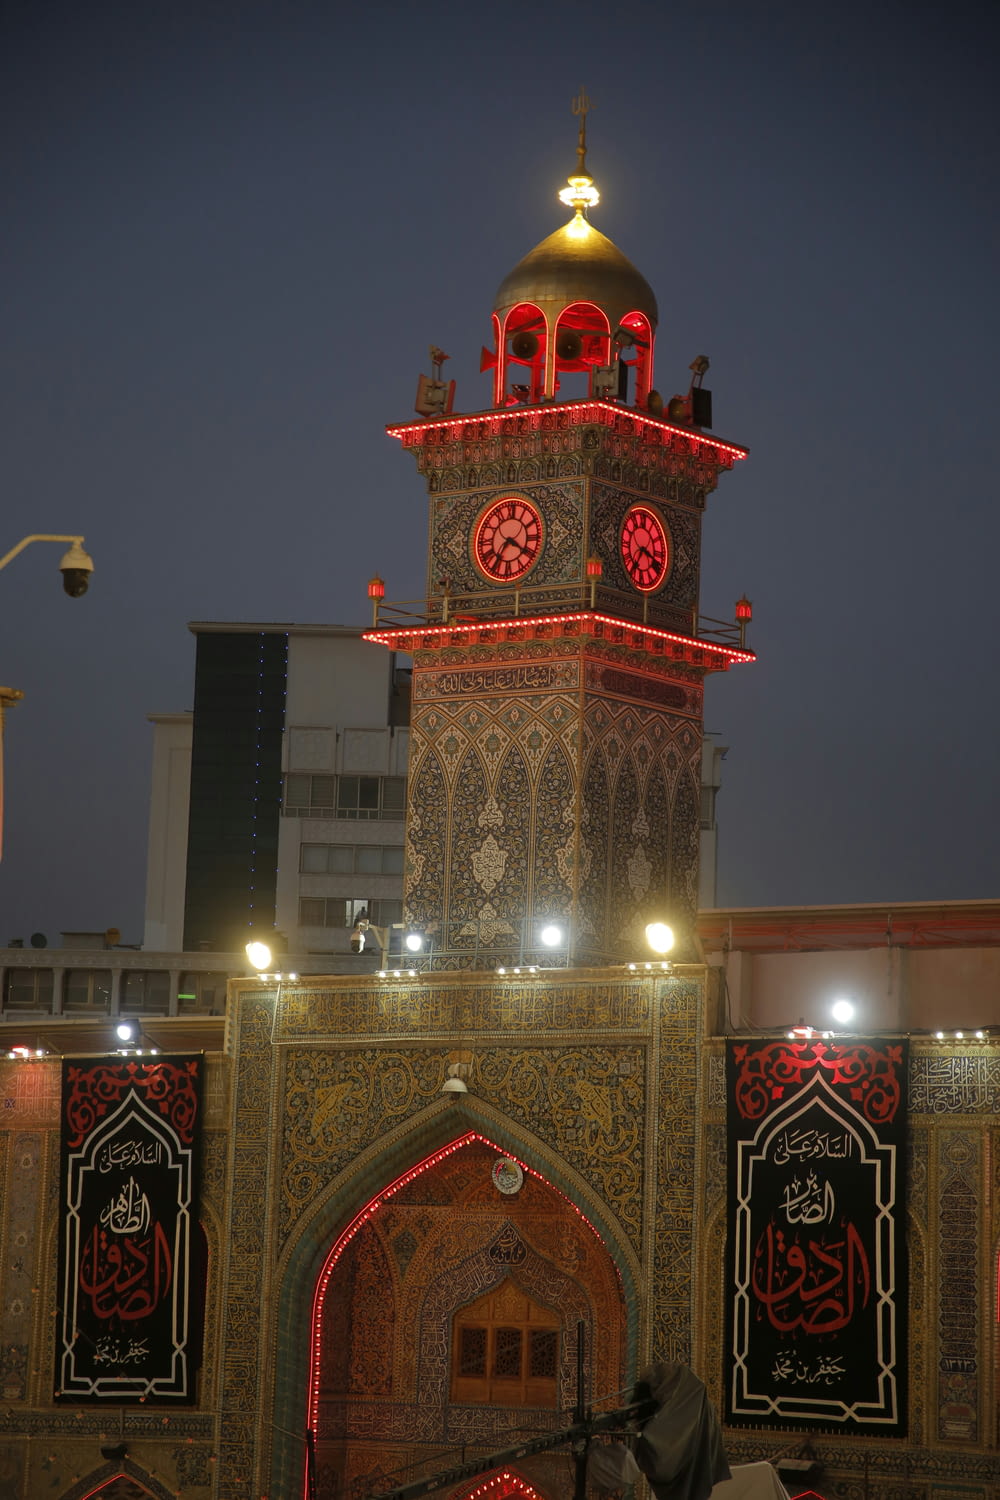 a clock tower lit up with red lights